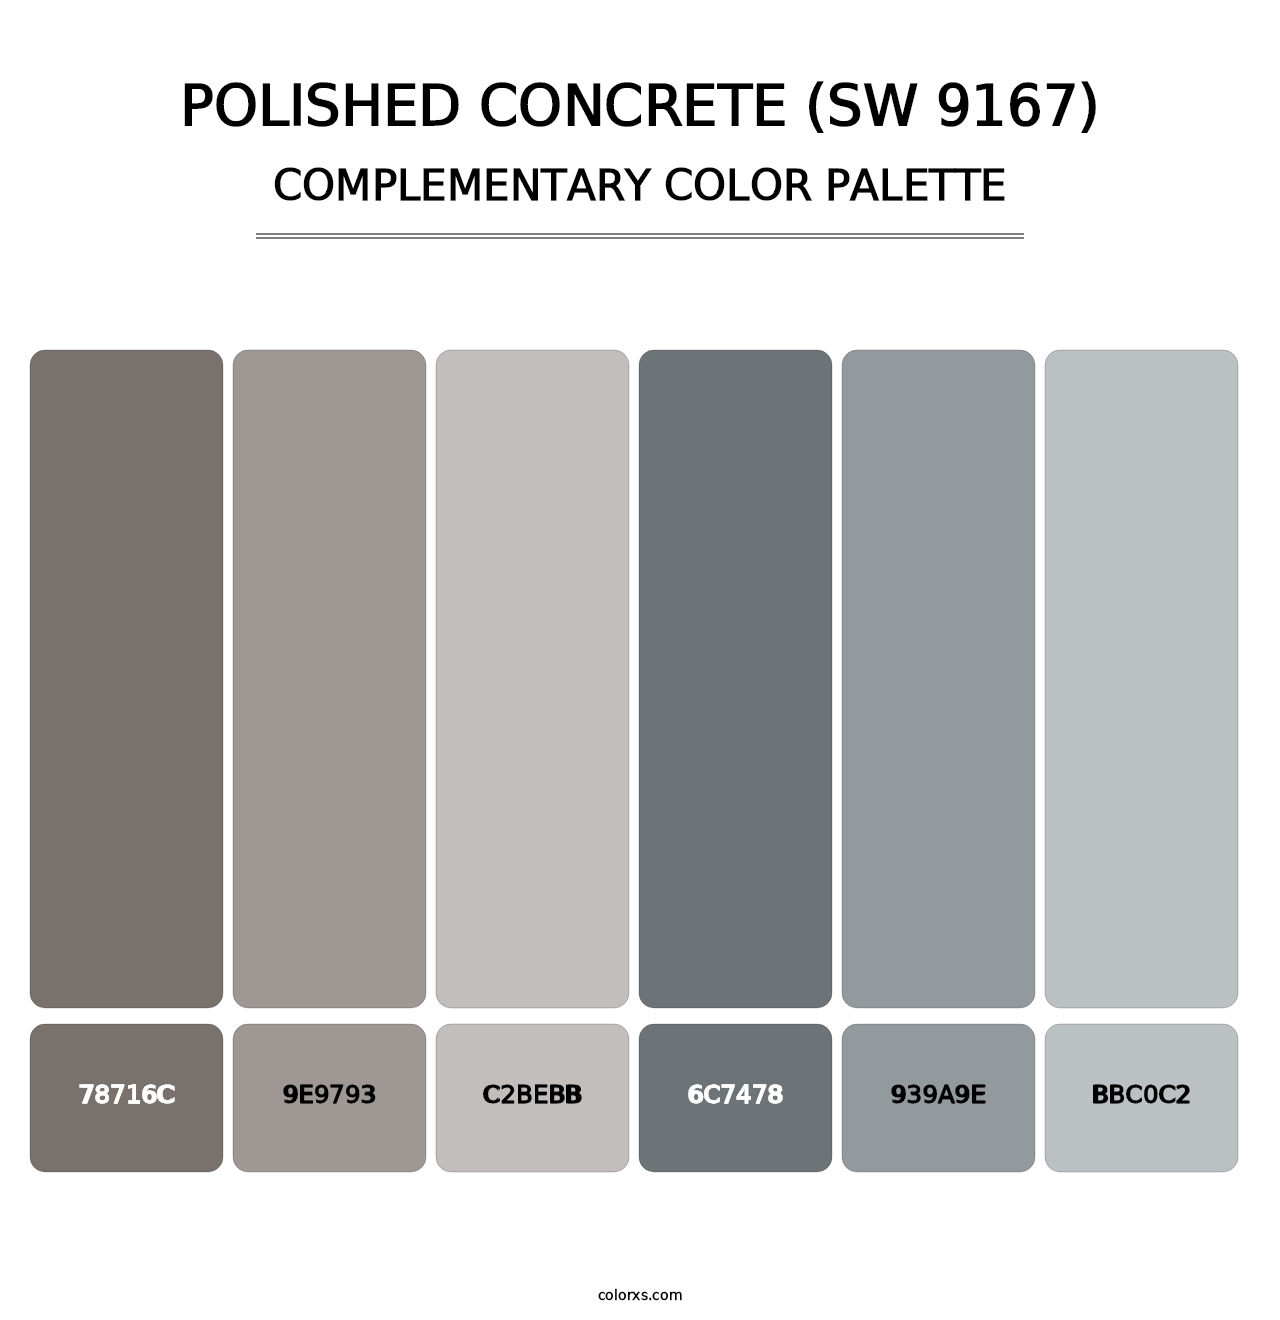 Polished Concrete (SW 9167) - Complementary Color Palette